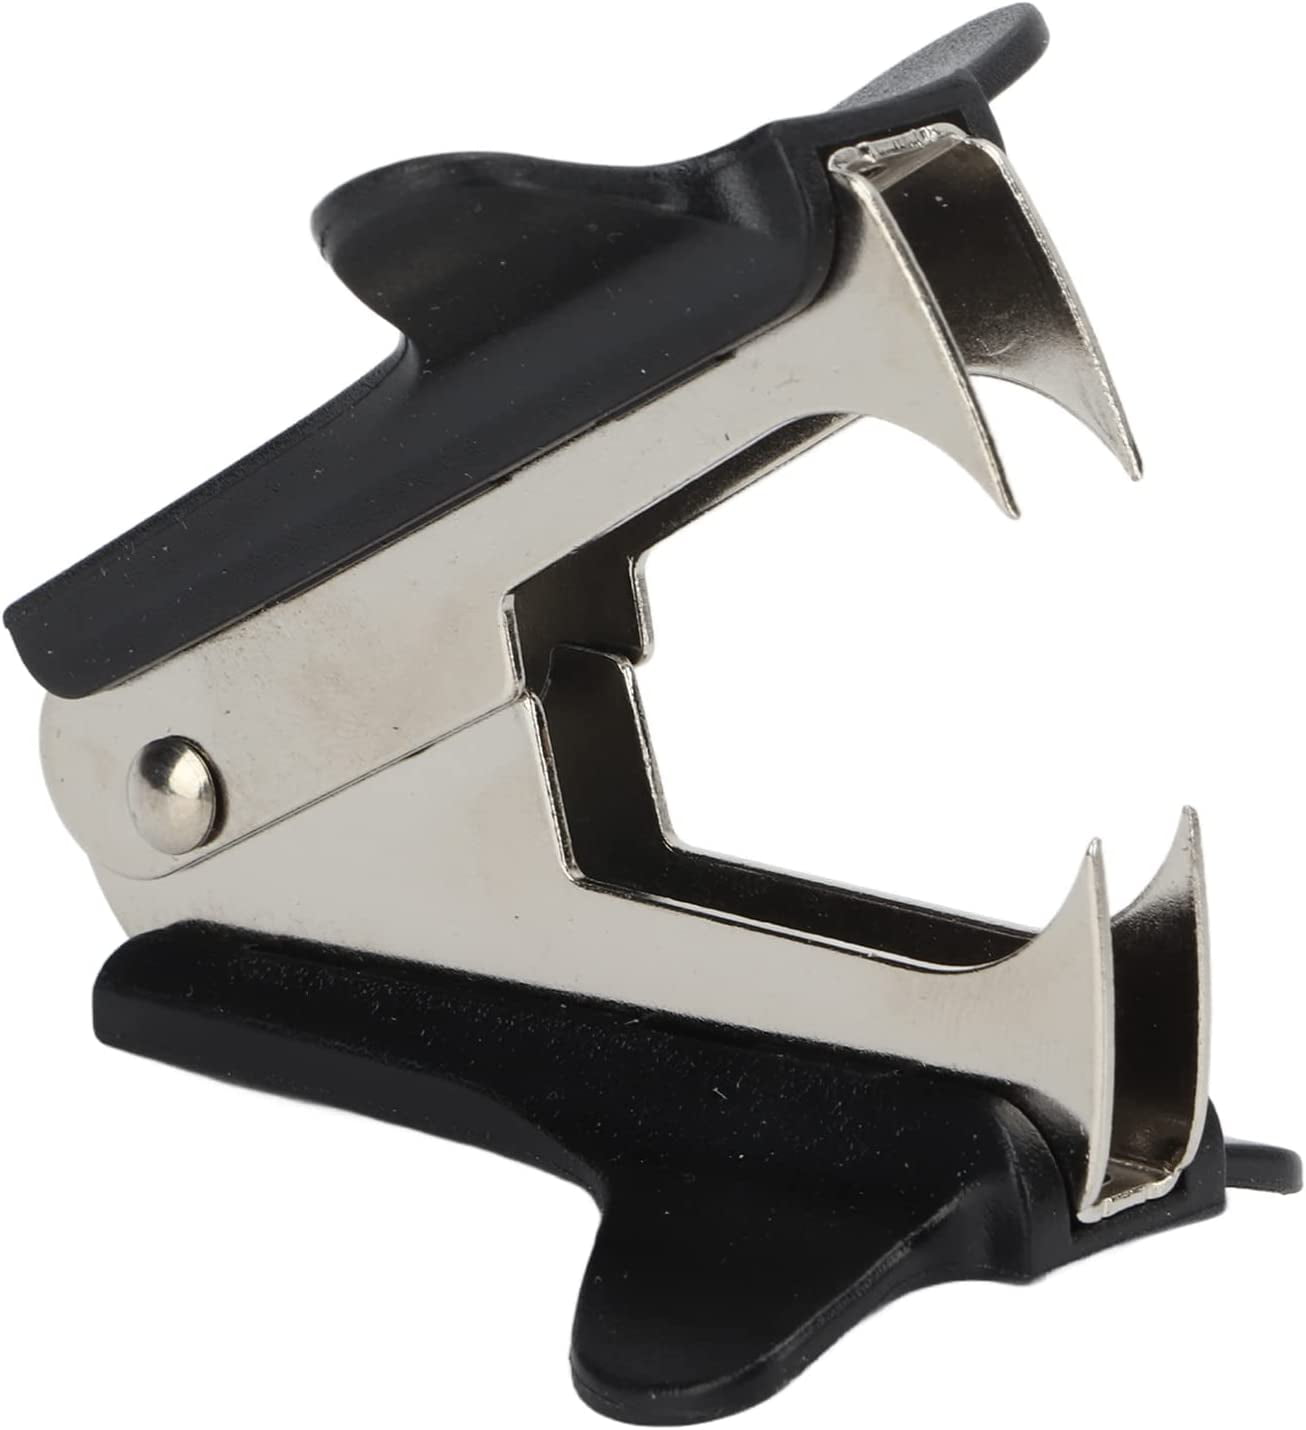 Staple Remover Saves Ergonomic Handle Staple Remover Tool 10 24/6 26/6 Staple Stain Resistant Office Supplies